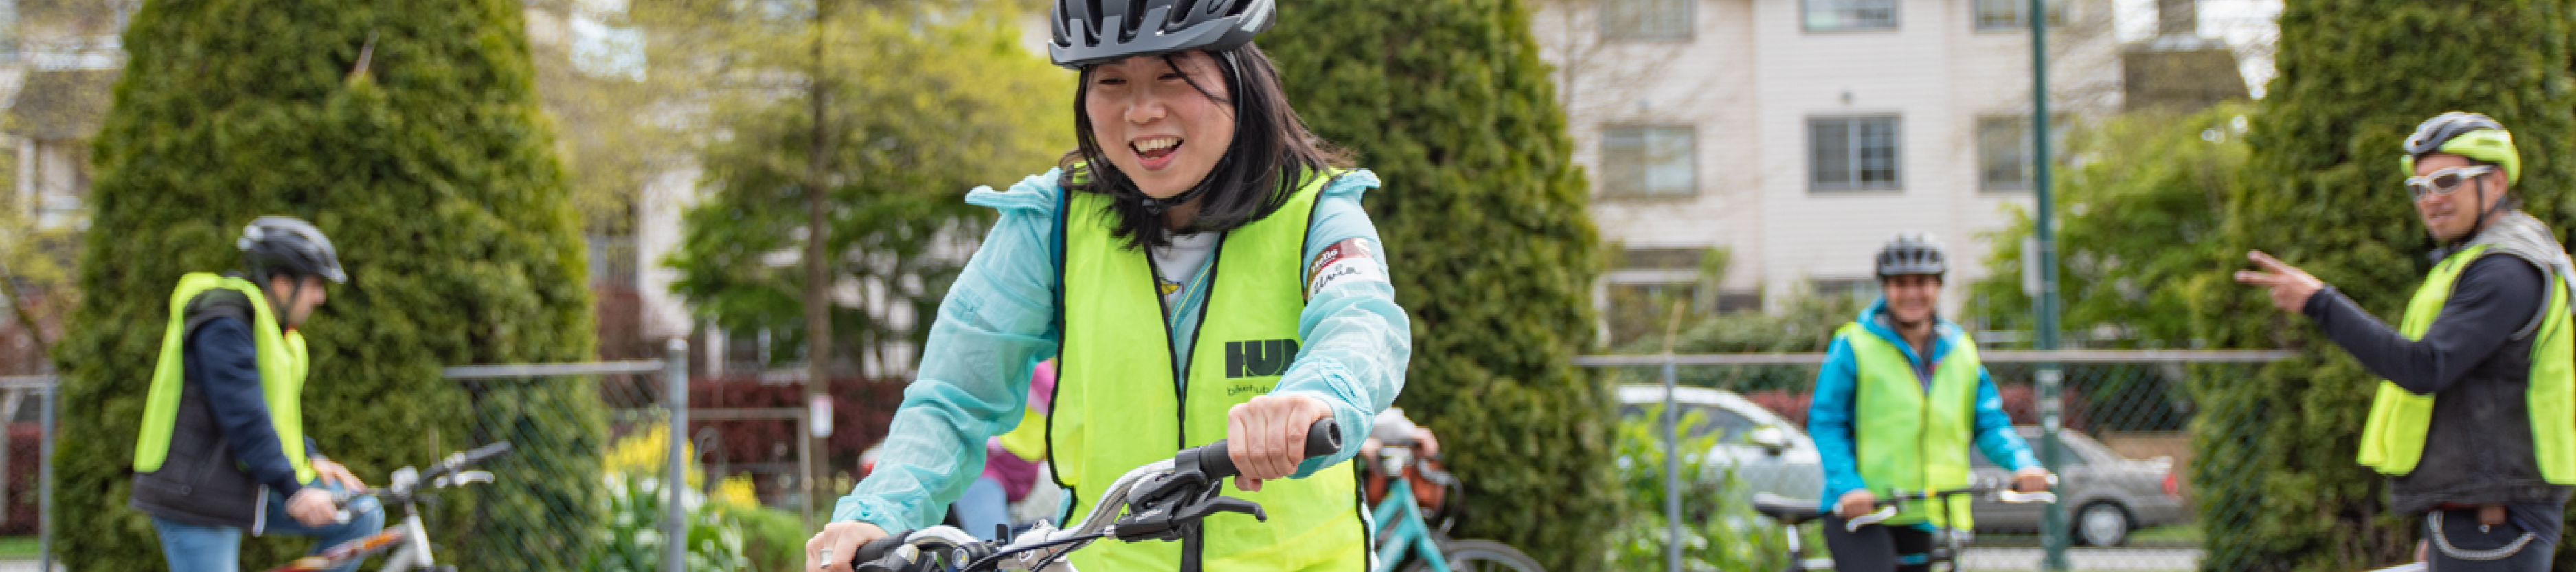 A middle-aged Asian woman rides her bike on a gravel field. There are several other people riding bikes behind her.